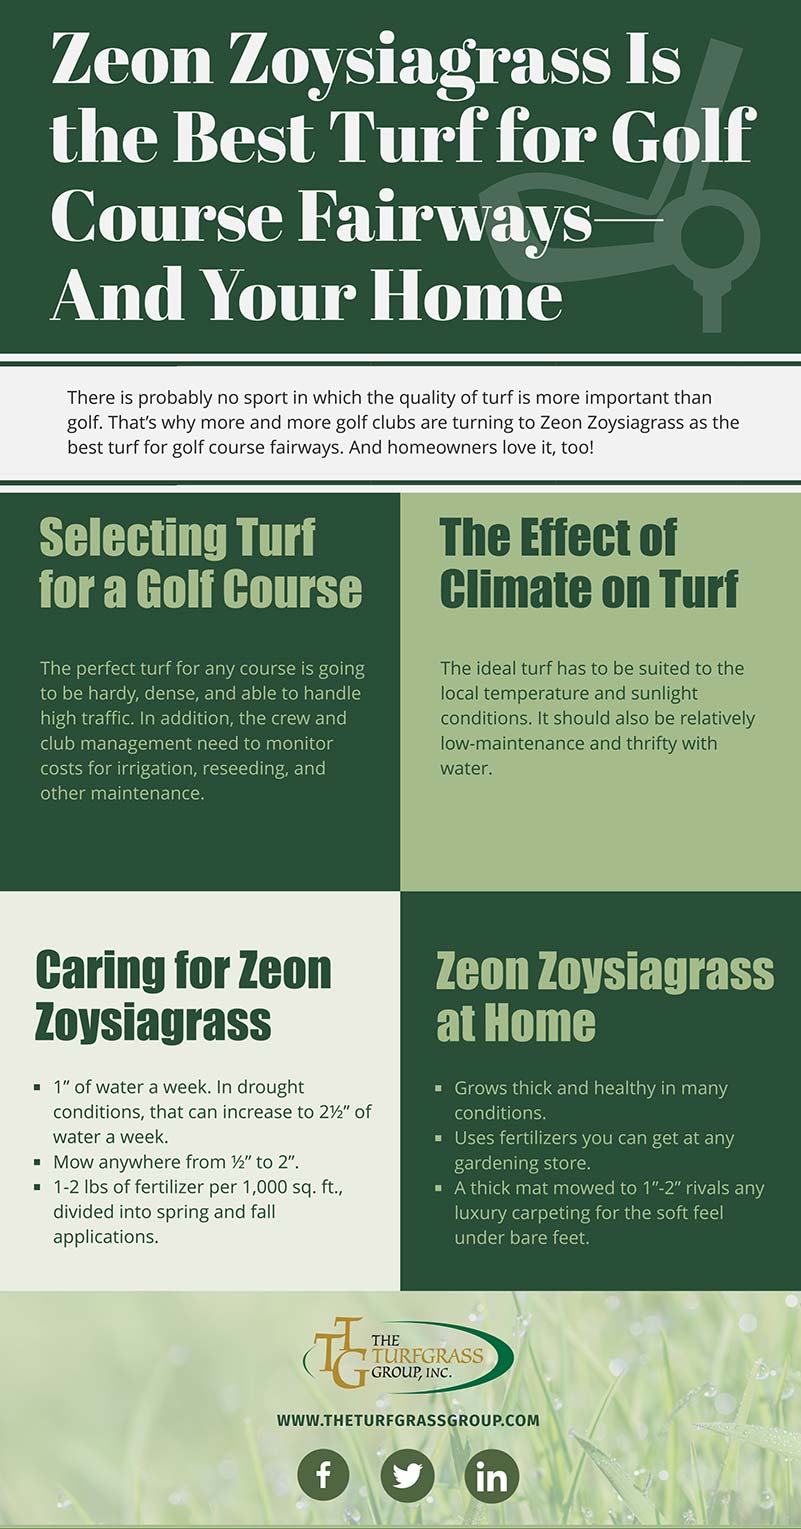 Why Zeon Zoysiagrass Is the Best Turf for Golf Course Fairways—And Your Home [infographic]